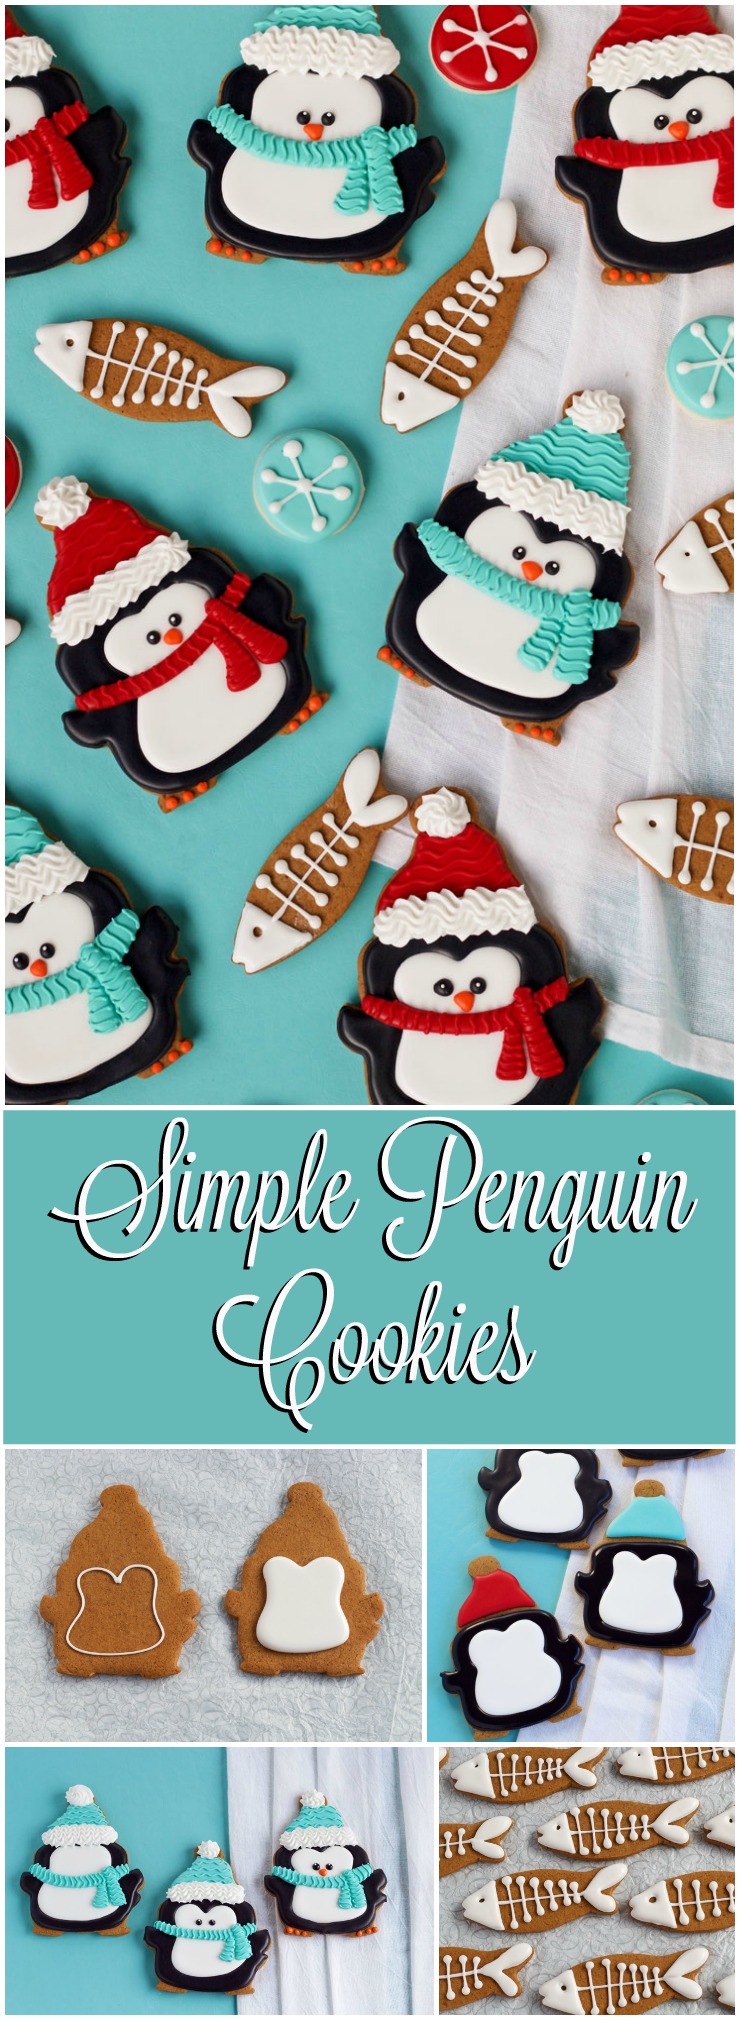 Fun and Simple Penguin Cookies with Cute Little Fish | The Bearfoot Baker